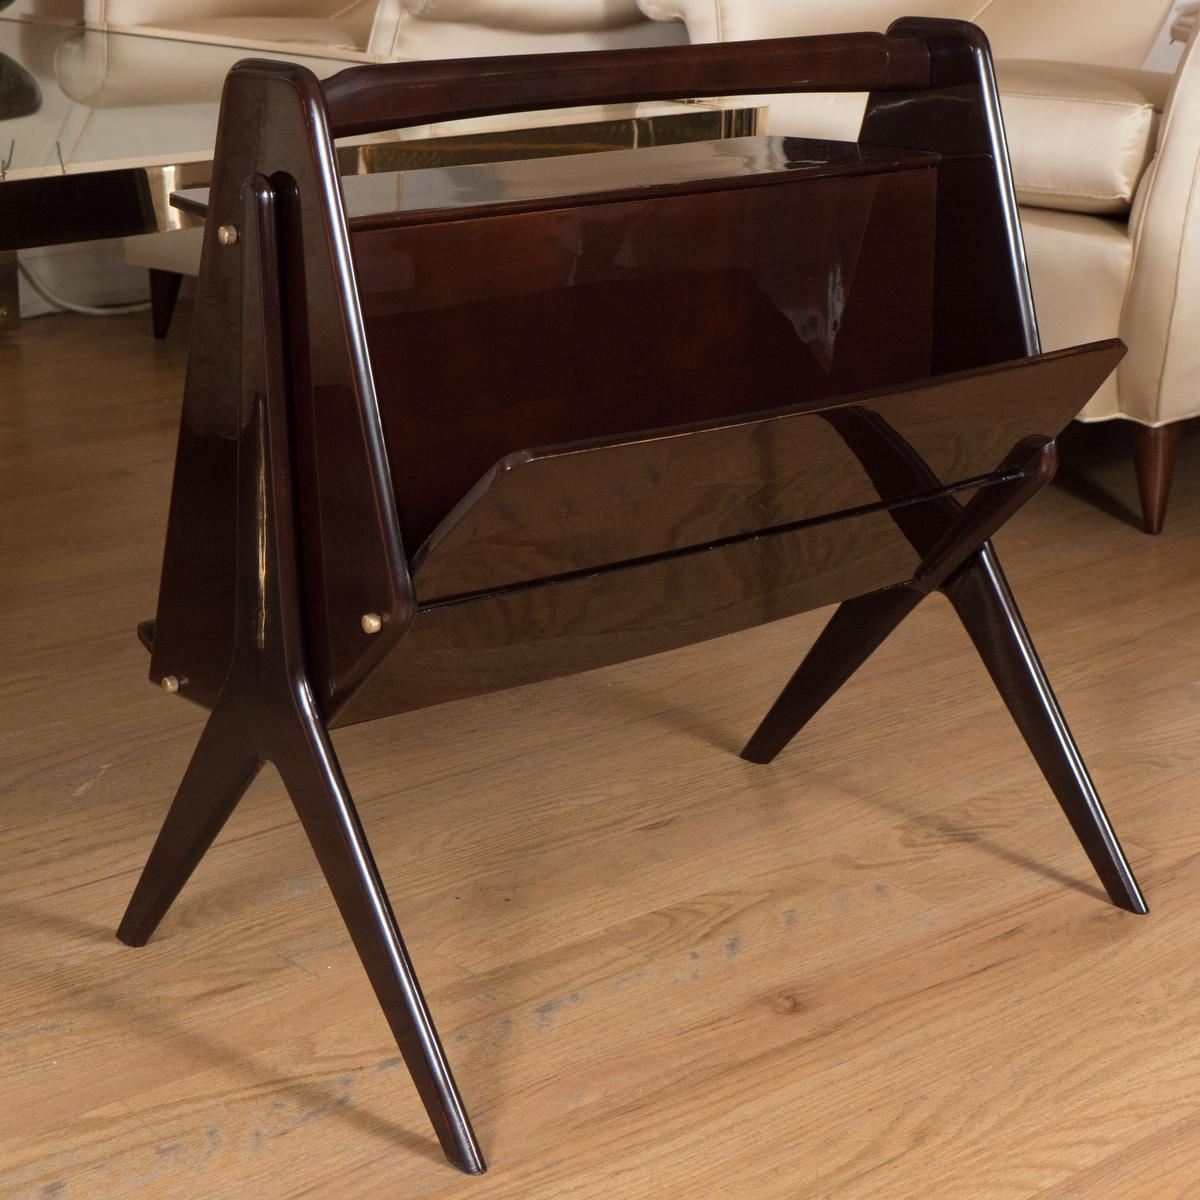 Modernist lacquered wood end table with brass details.